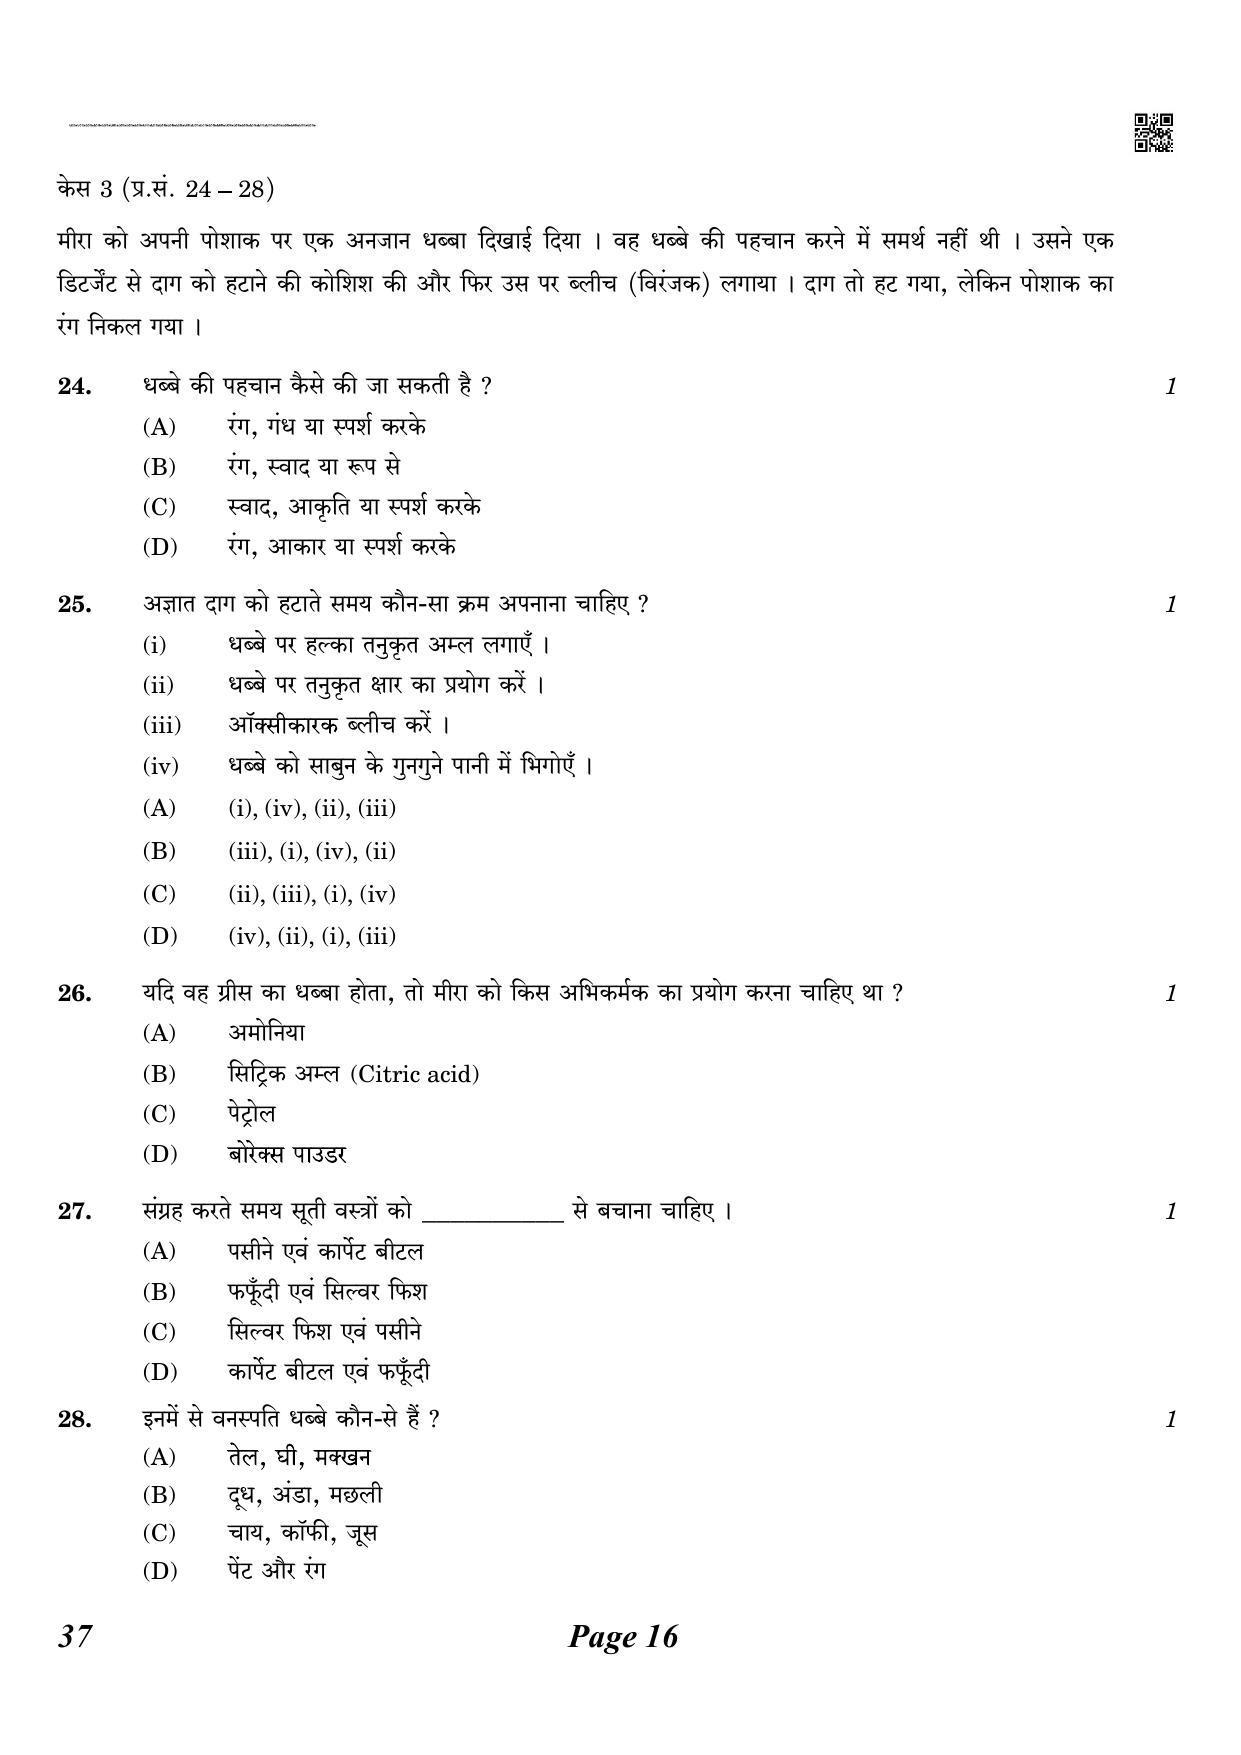 CBSE Class 10 QP_064_Home_Science 2021 Compartment Question Paper - Page 16